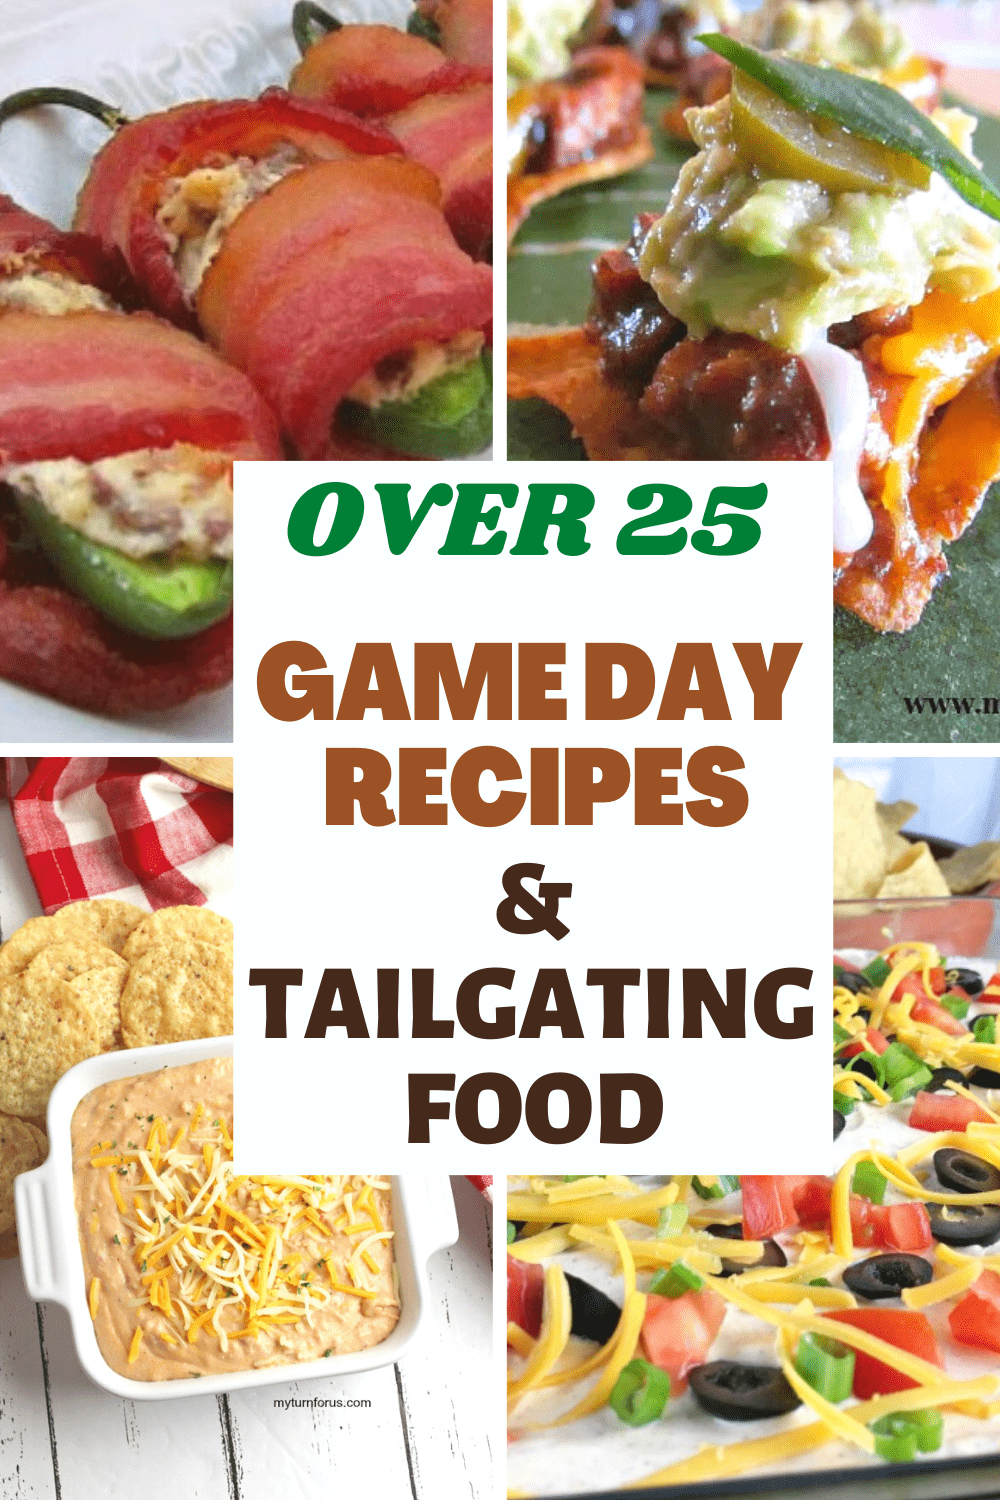 tailgating parties, Football Party Food Recipes, game day appetizers, tailgate food